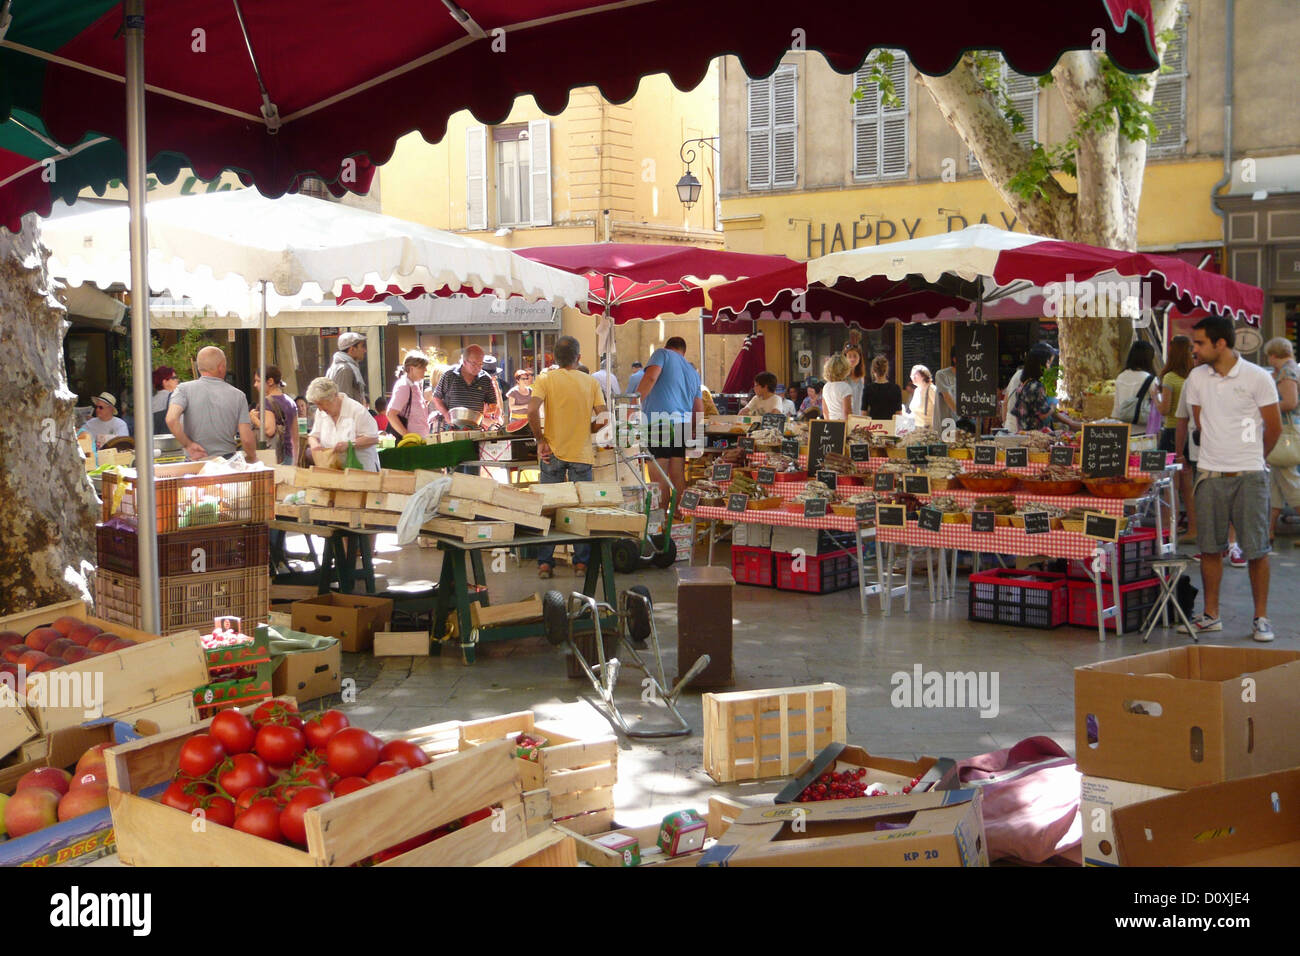 France, Europe, Aix en Provence, town, city, market, weekly market, vegetables, fruits, market stall Stock Photo